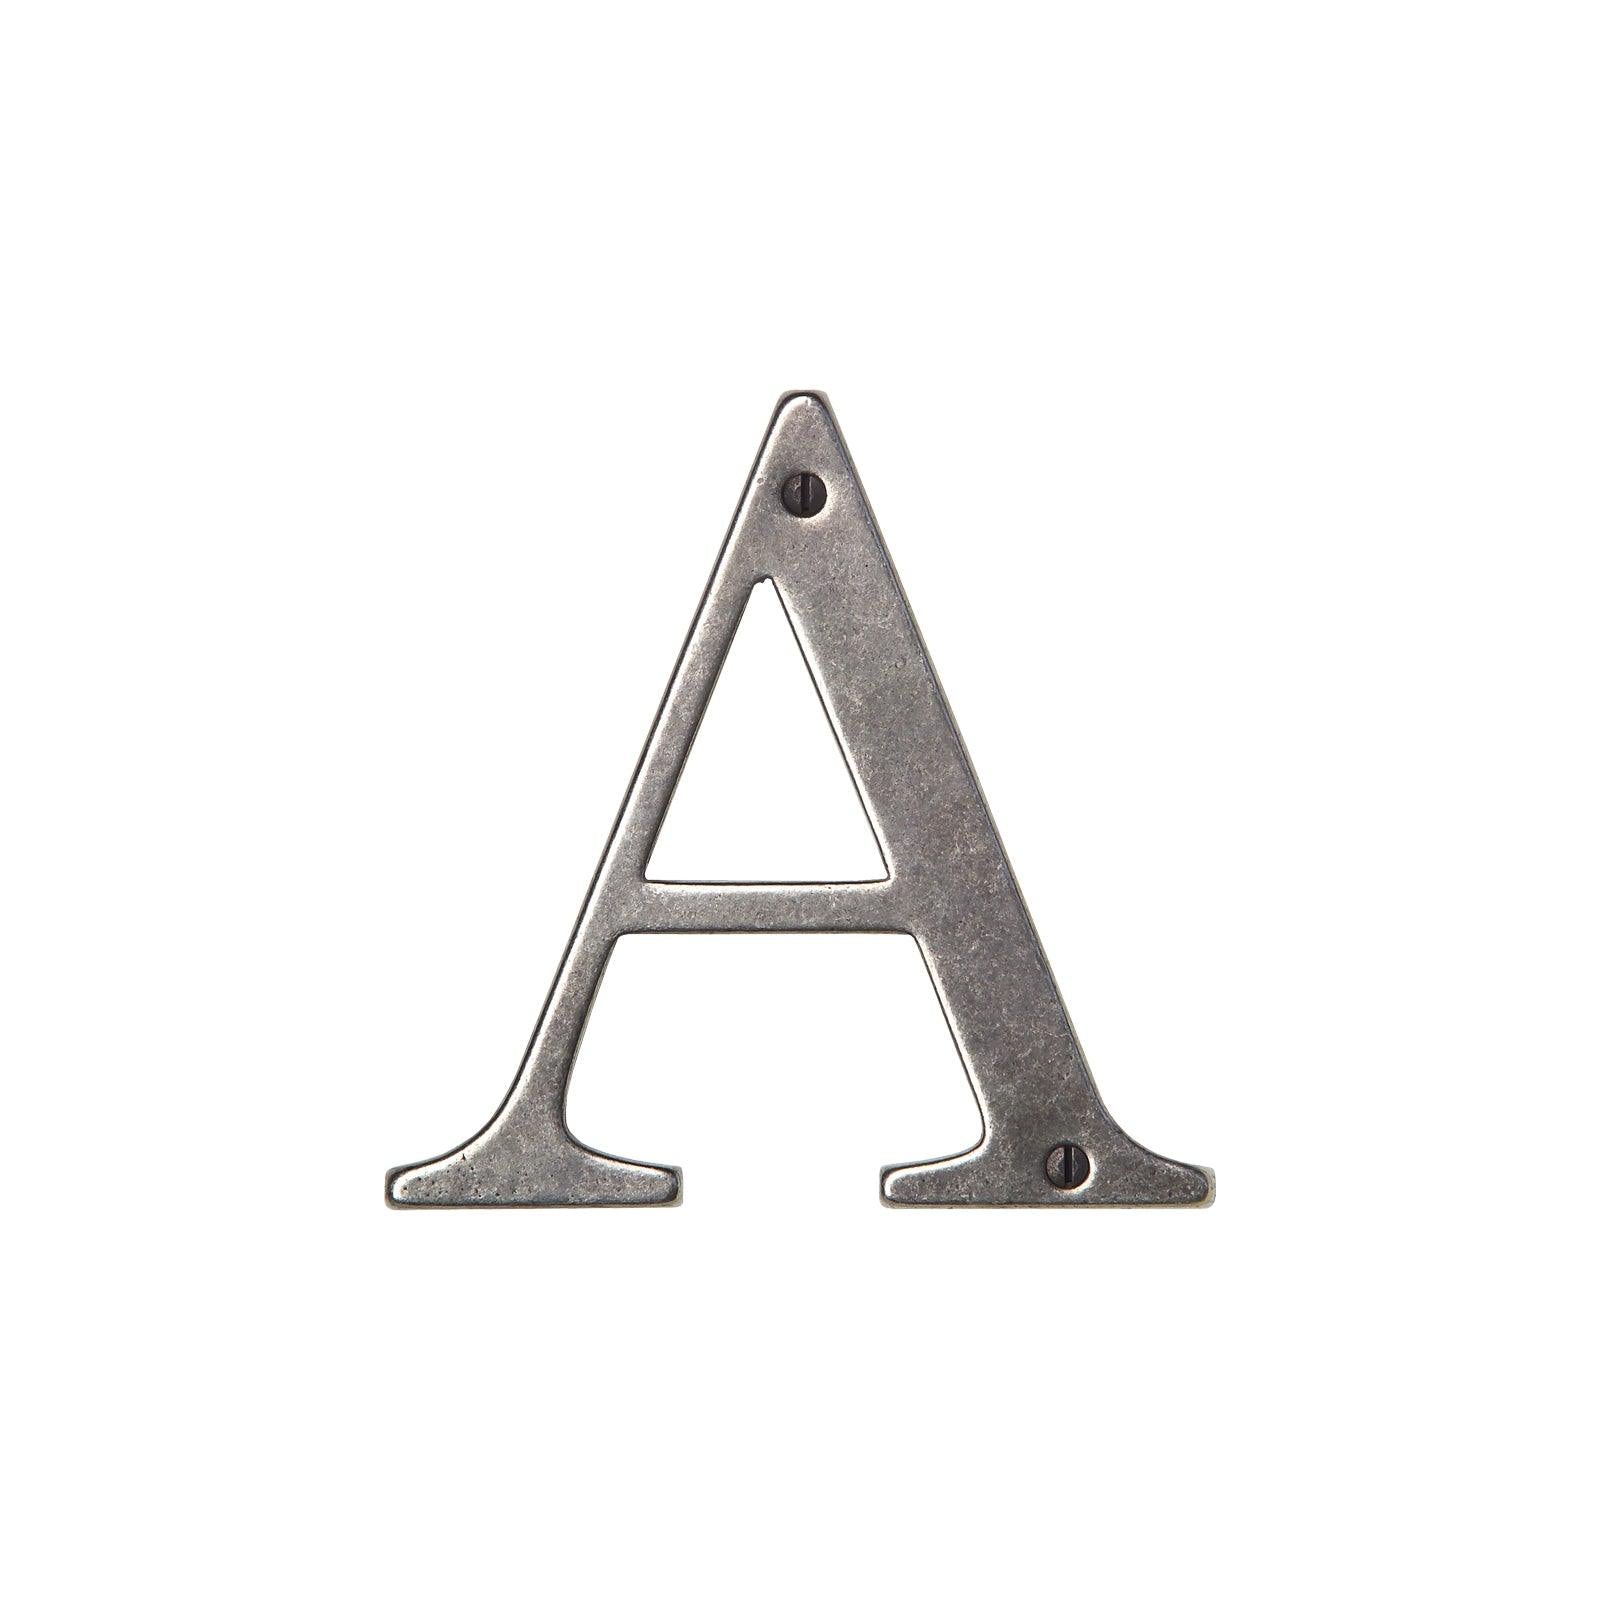 L400X - 4" House Letter “X" - Discount Rocky Mountain Hardware